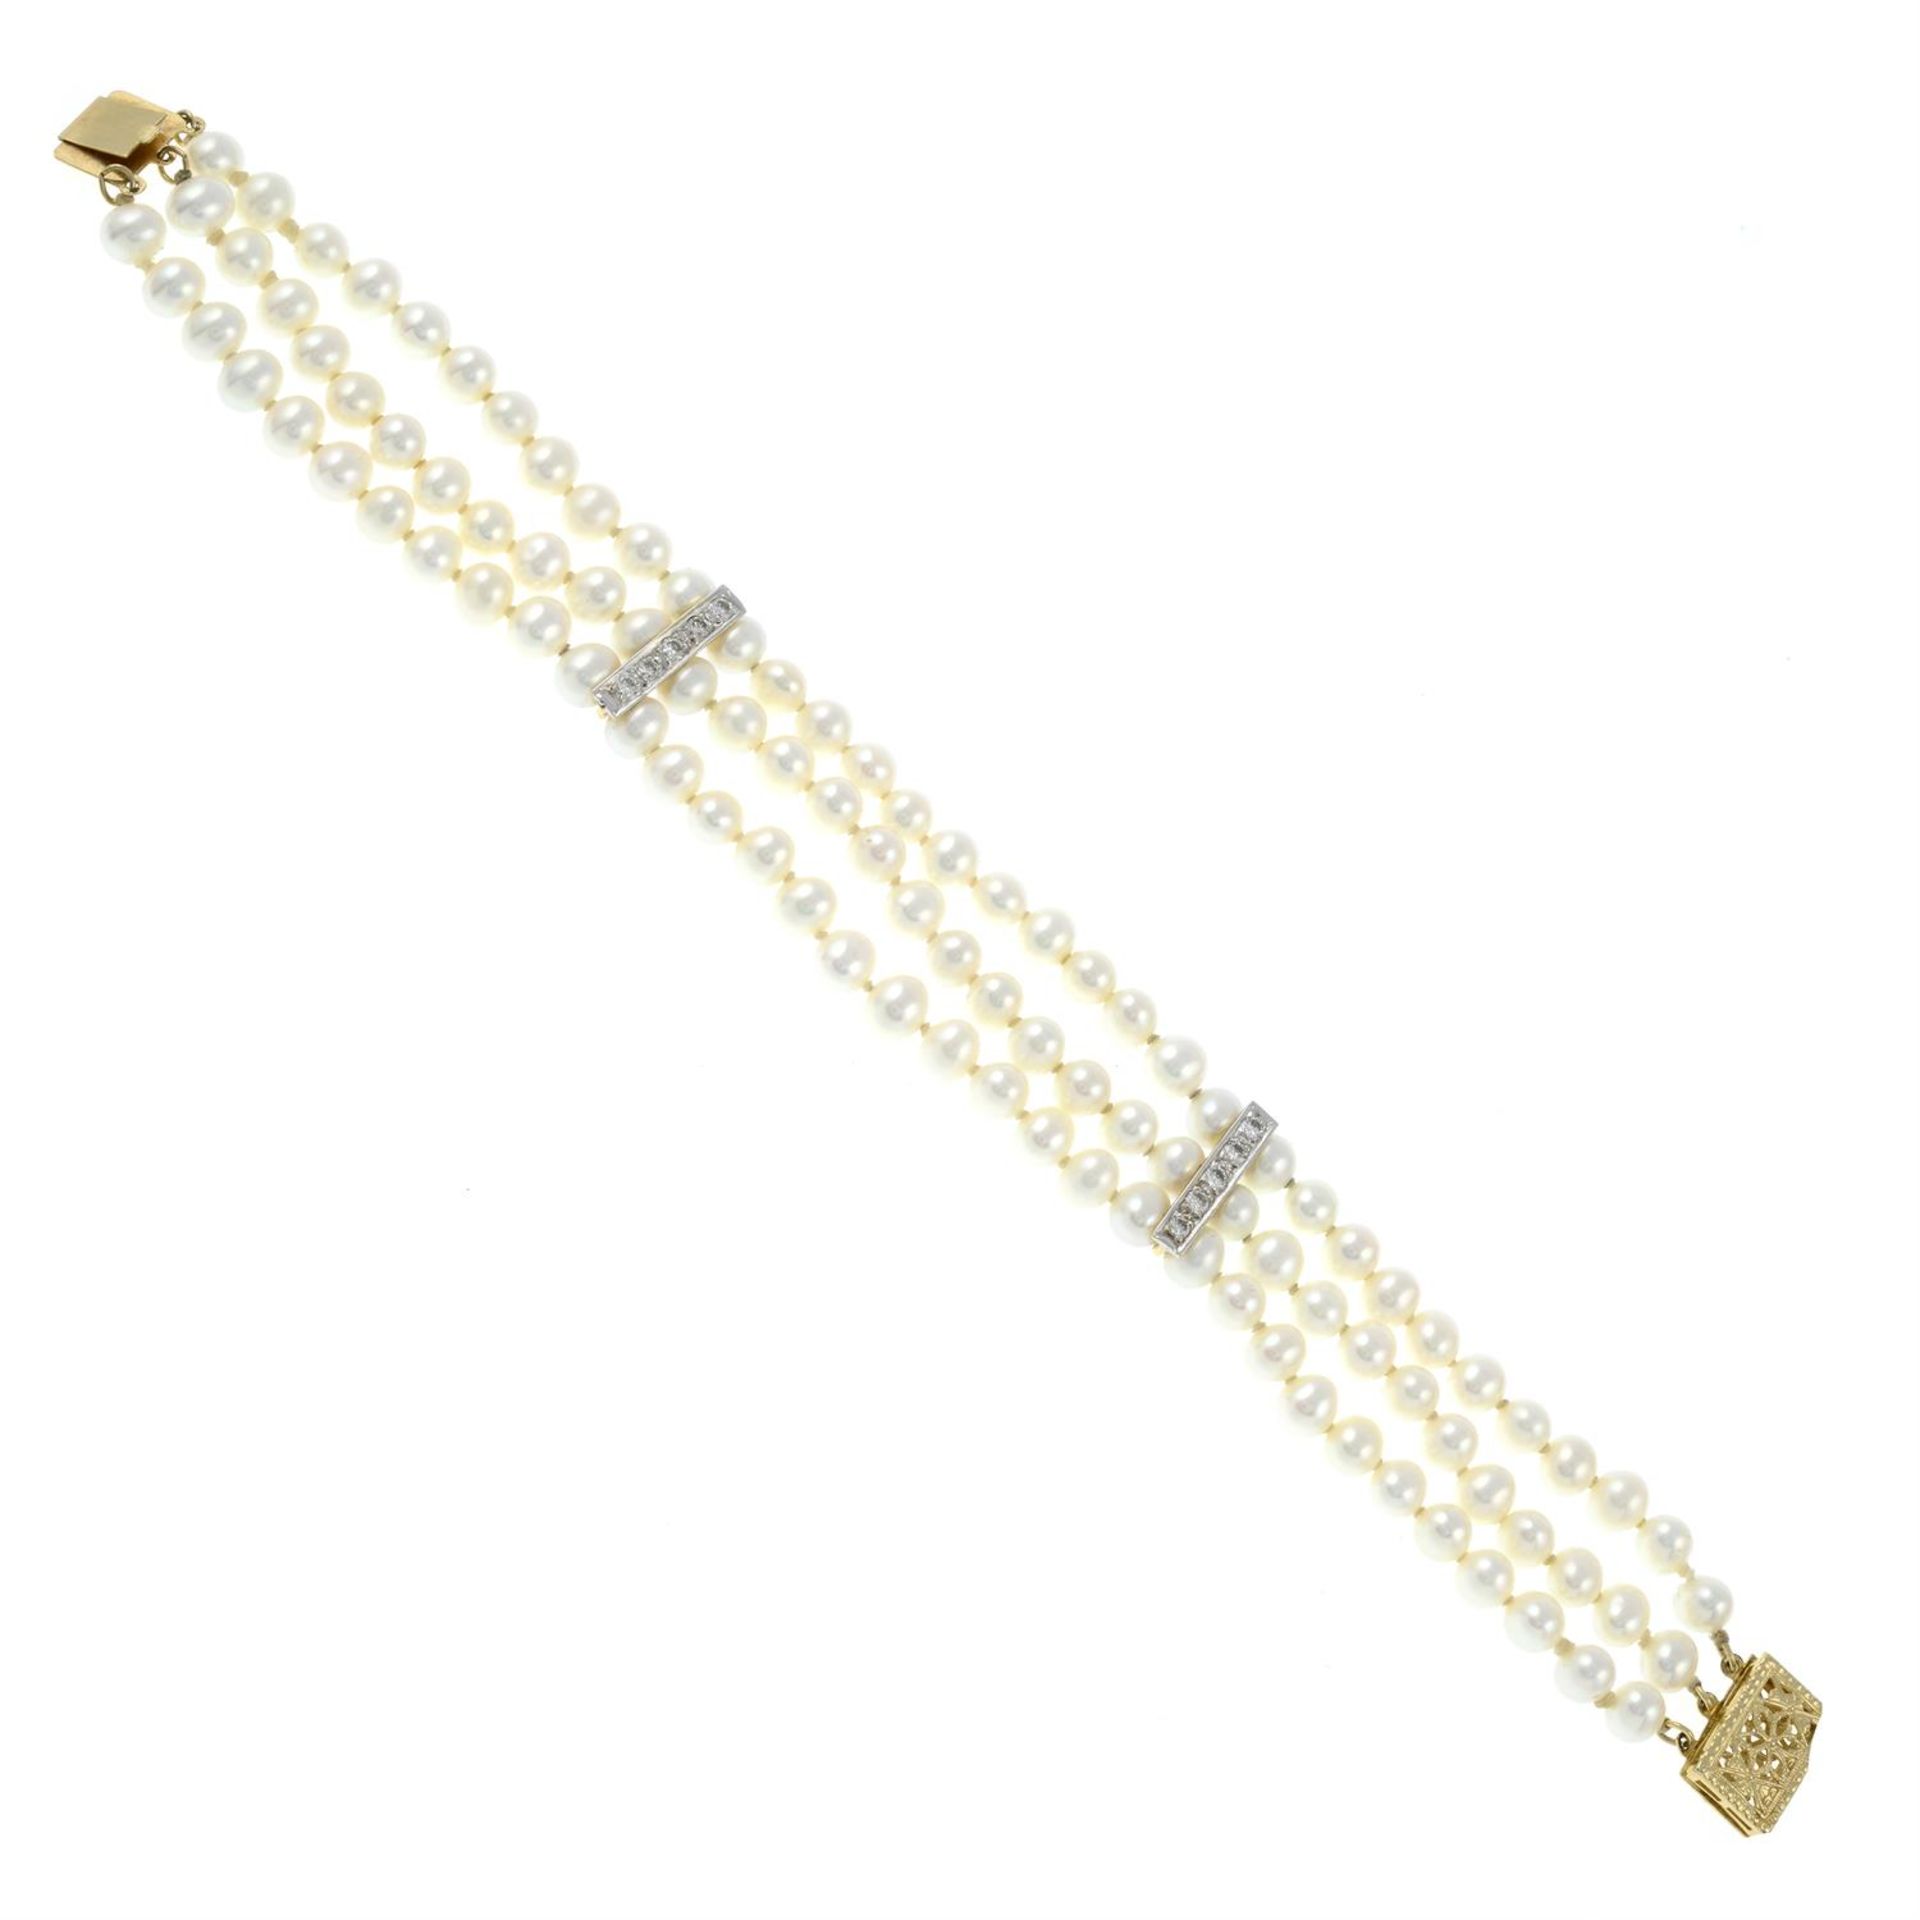 A cultured pearl three-row bracelet, with diamond line spacers and openwork clasp.